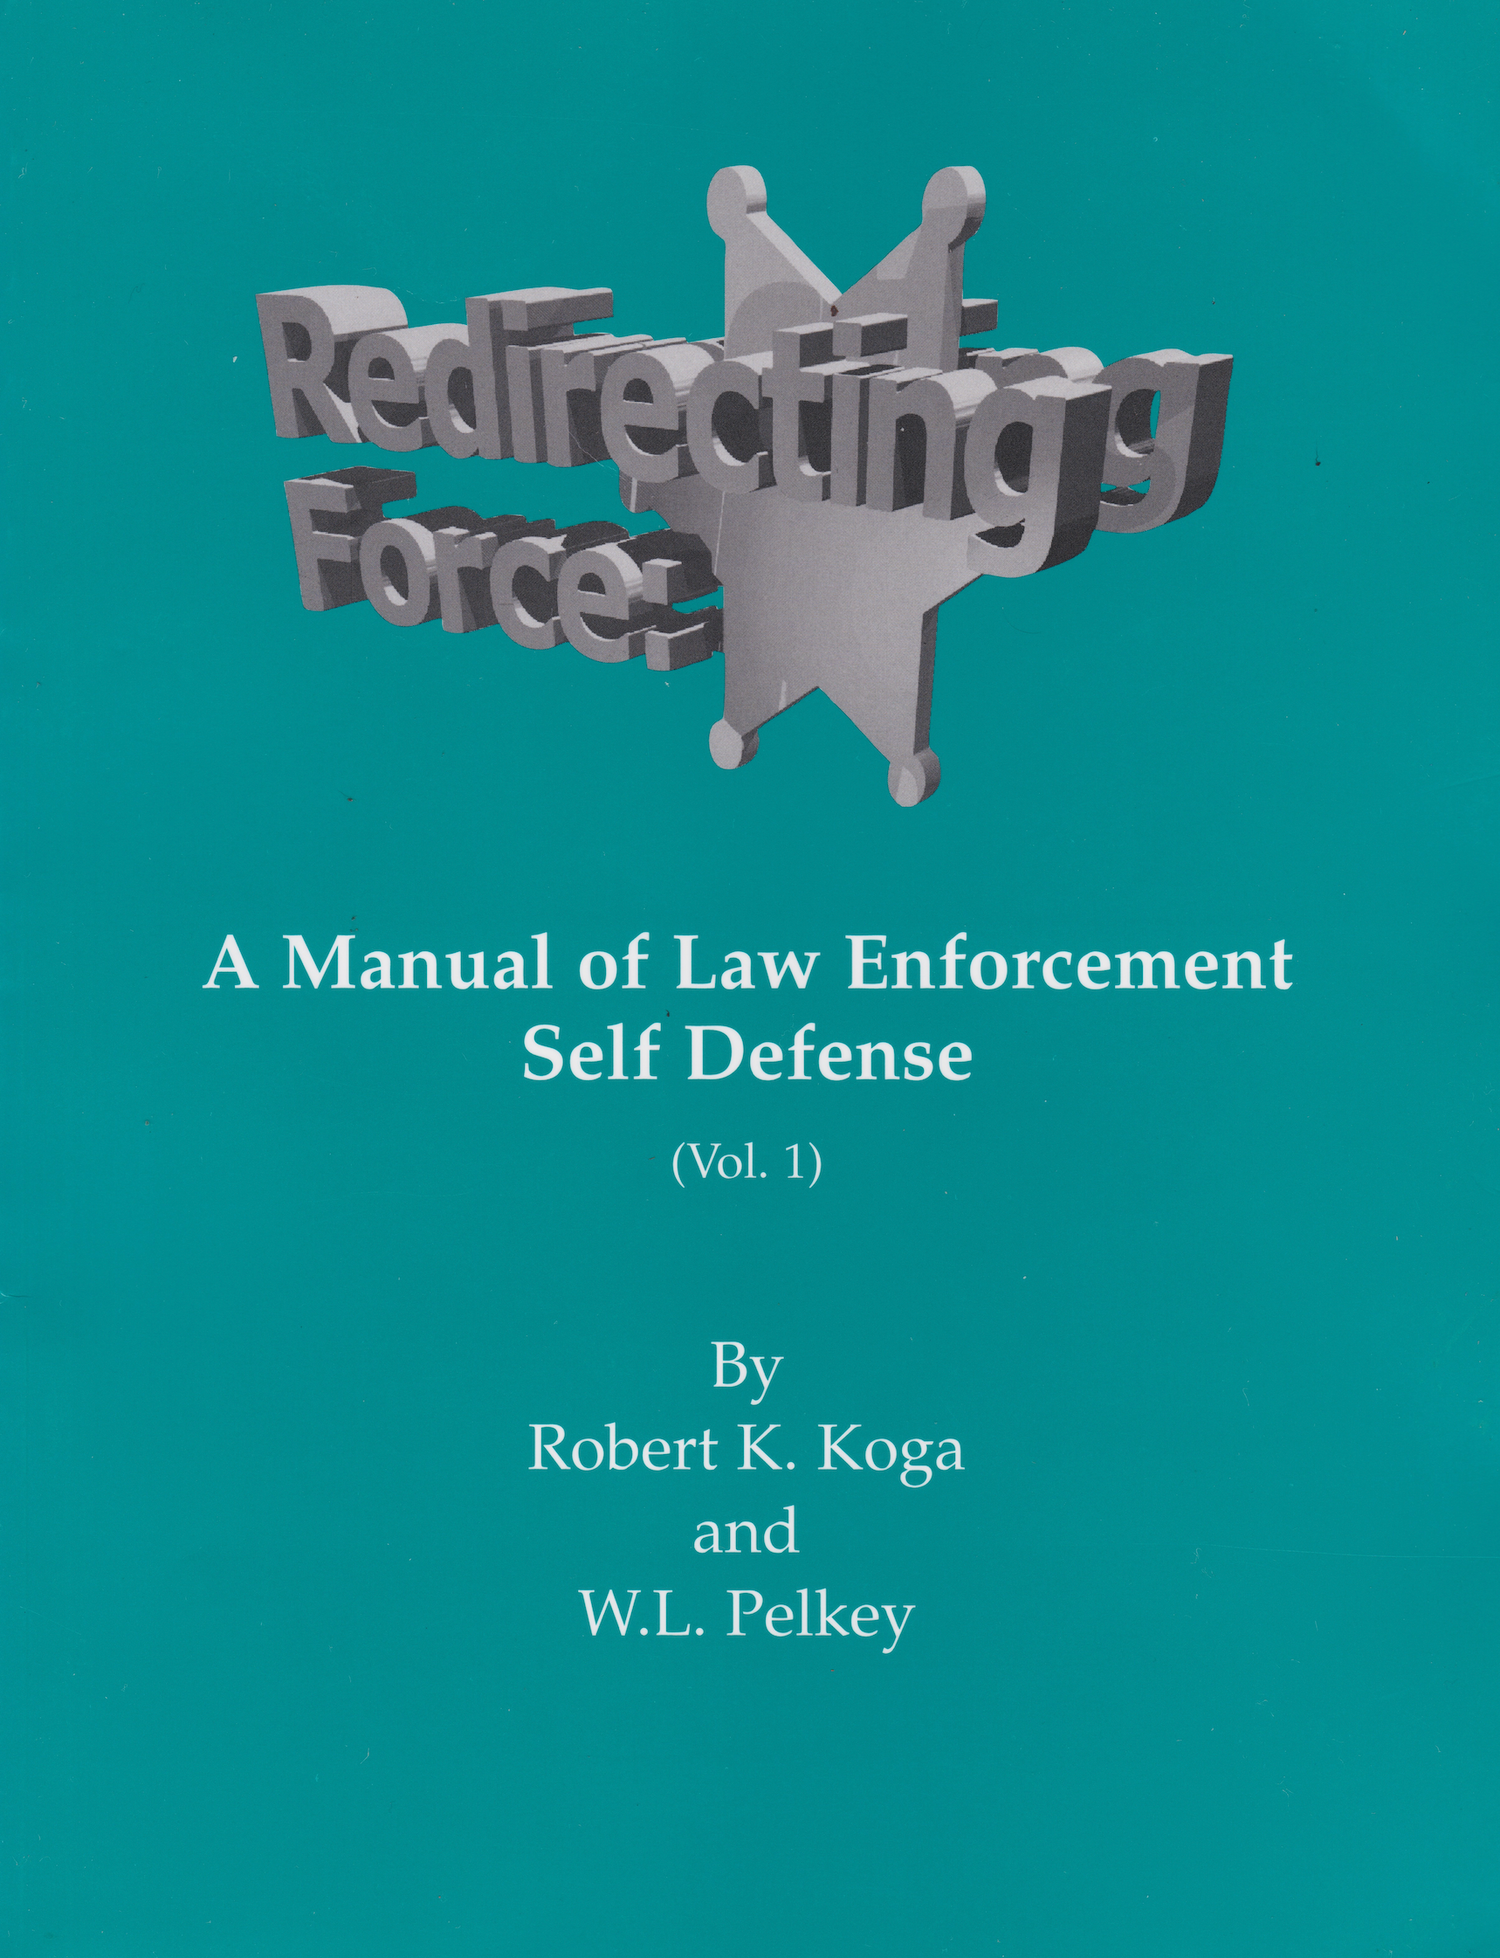 Redirecting Force: A Manual for Law Enforcement Book by Robert Koga (Preowned)